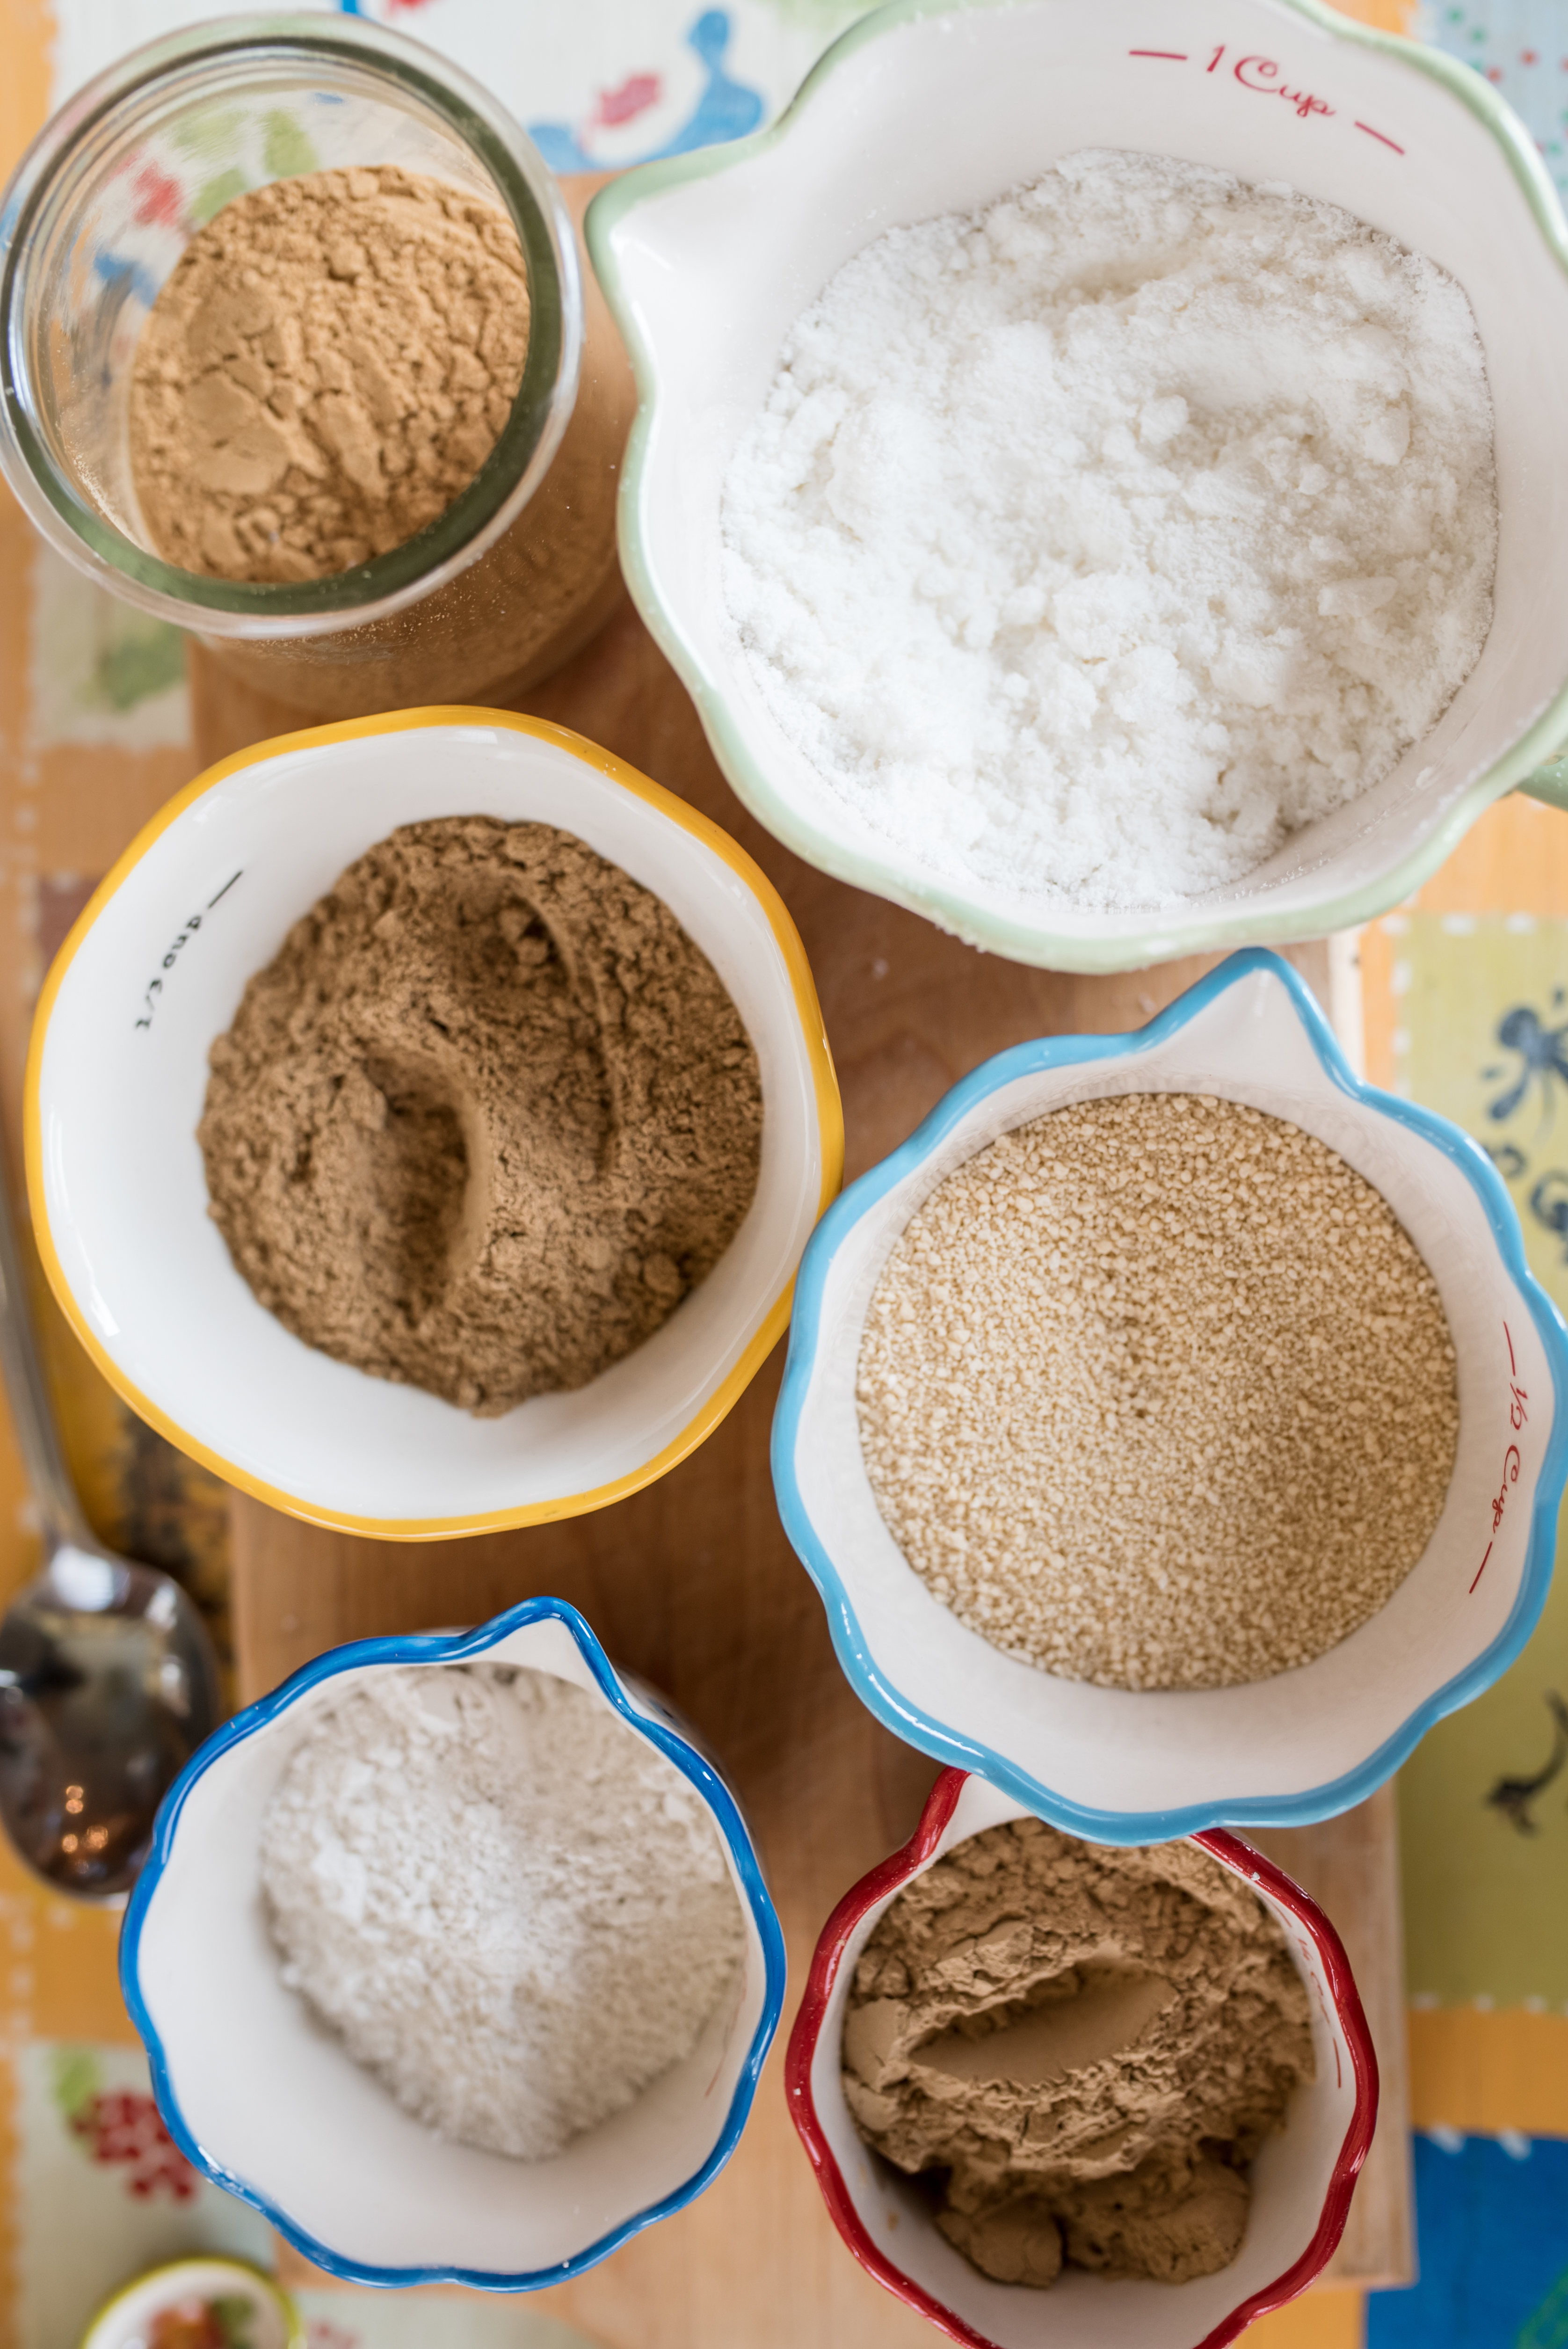 6 small colorful bowls filled with powdered ingredients